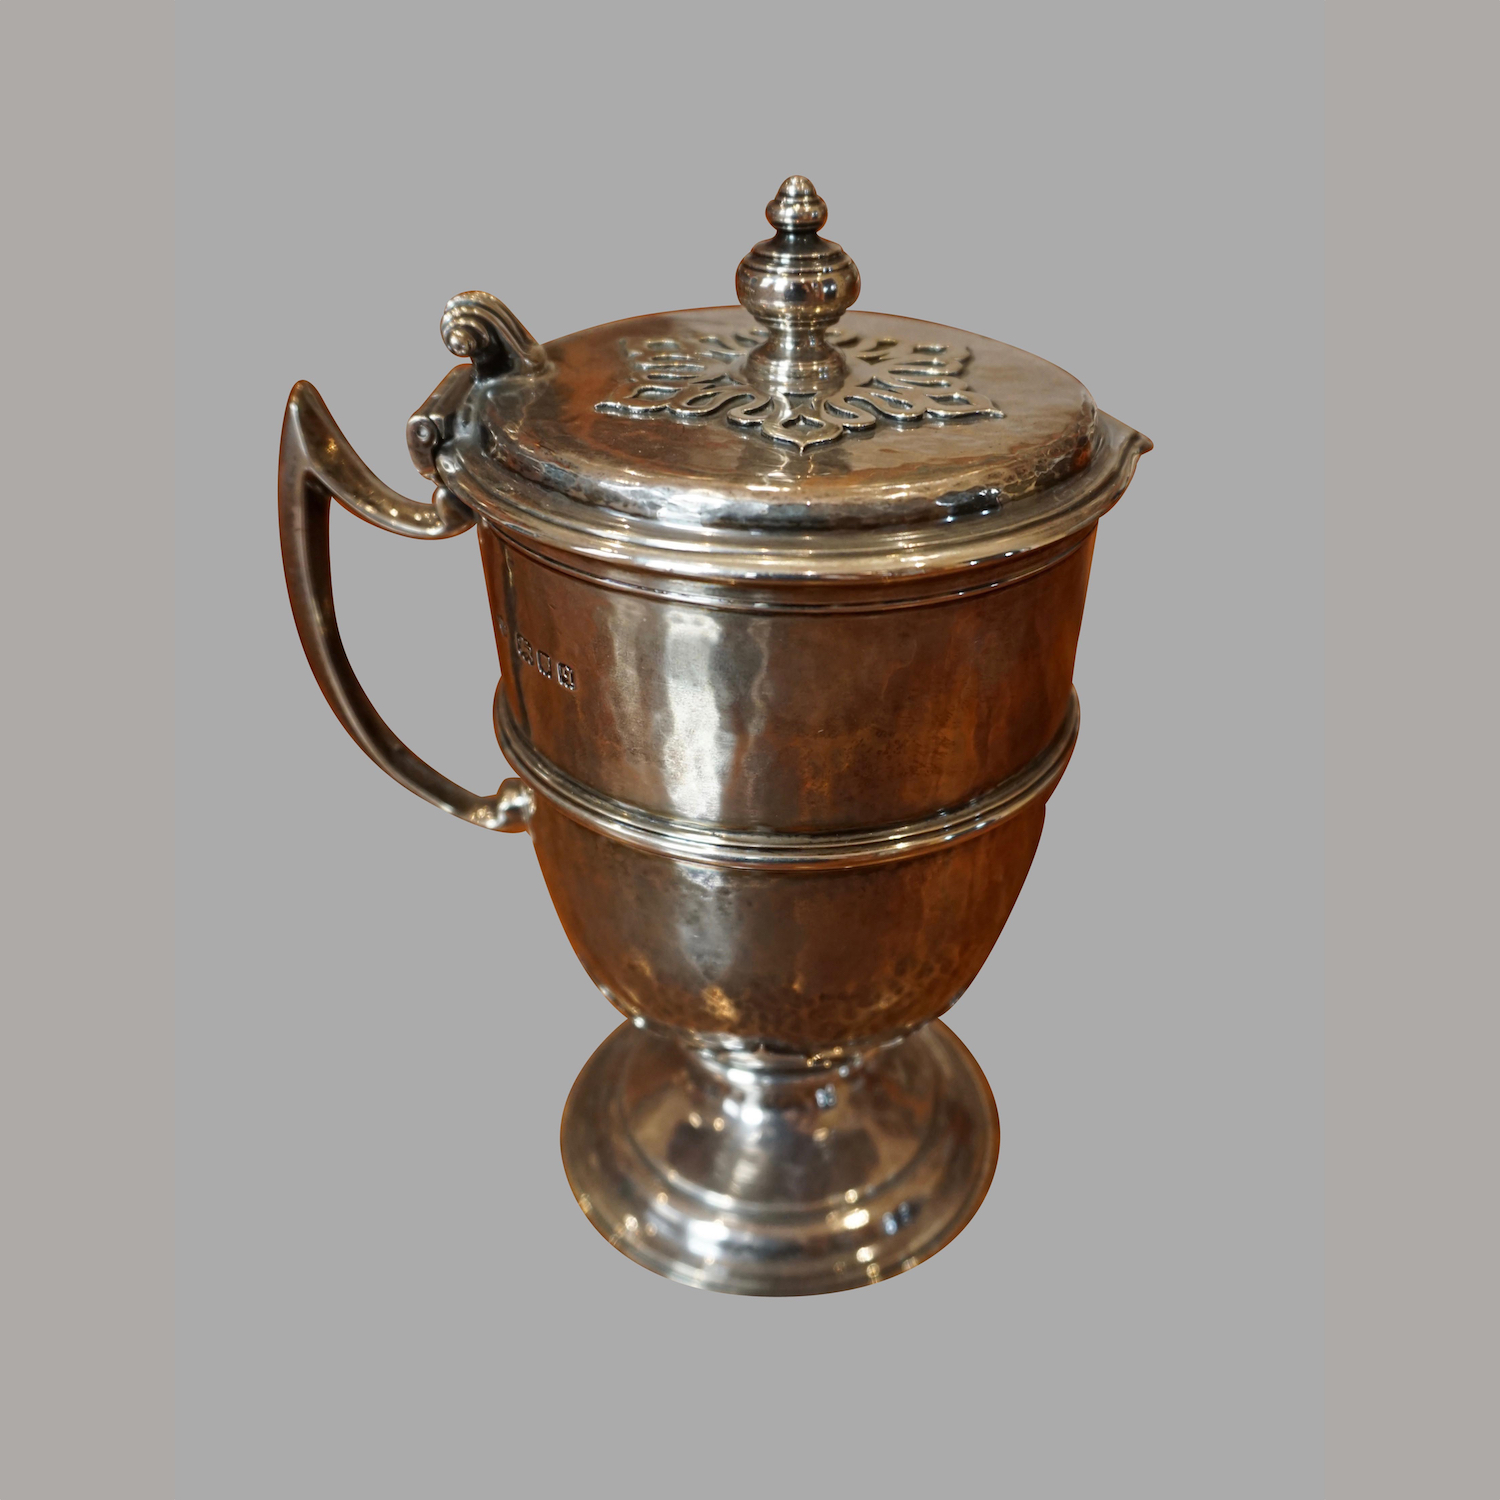 english-arts-crafts-sterling-silver-lidded-cup-a1021-6